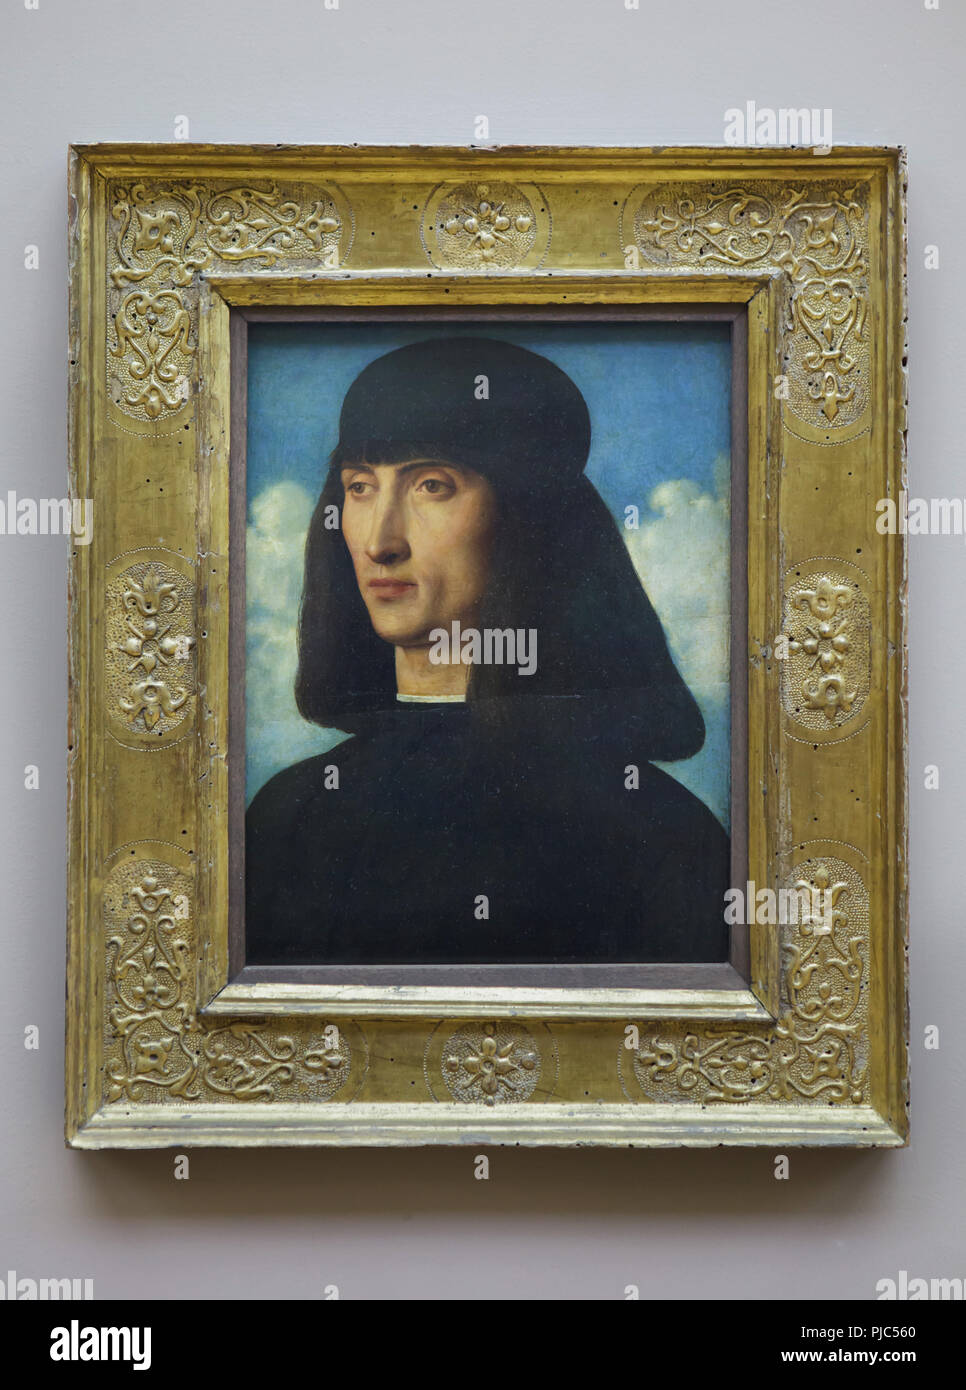 Portrait of a man by Italian Renaissance painter Giovanni Bellini (ca. 1490-1495) on display in the Louvre Museum in Paris, France. Stock Photo